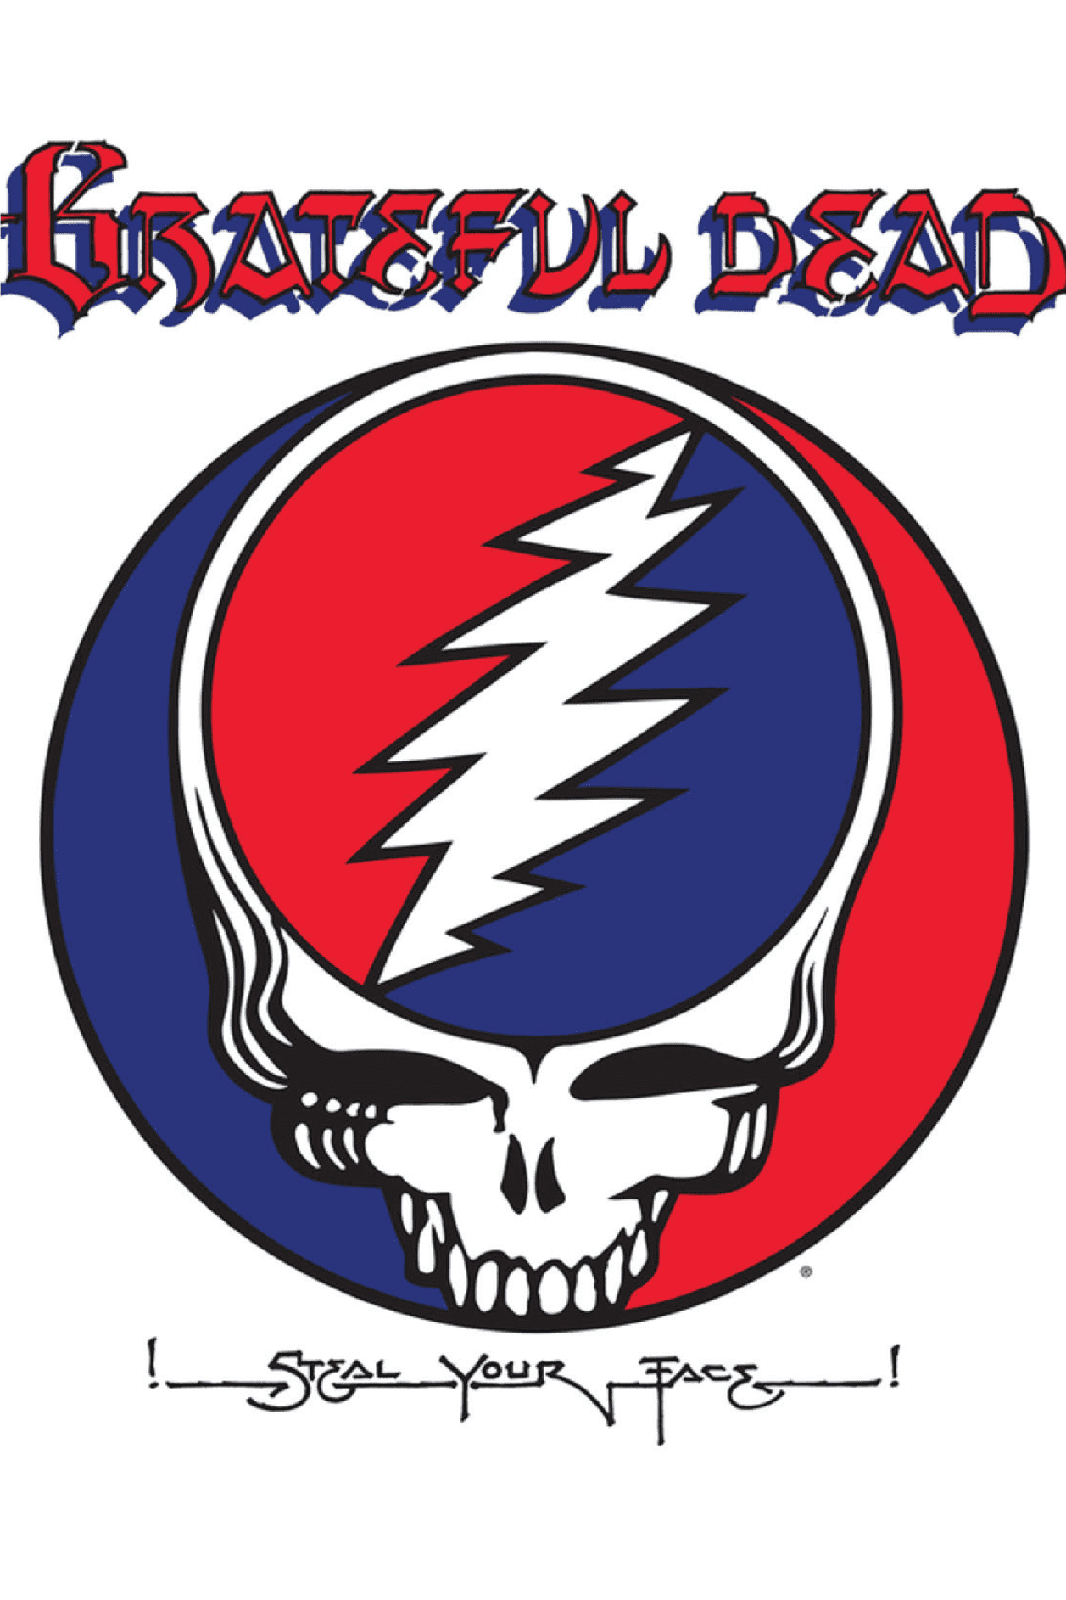 STEAL YOUR FACE POSTER - PosterFi